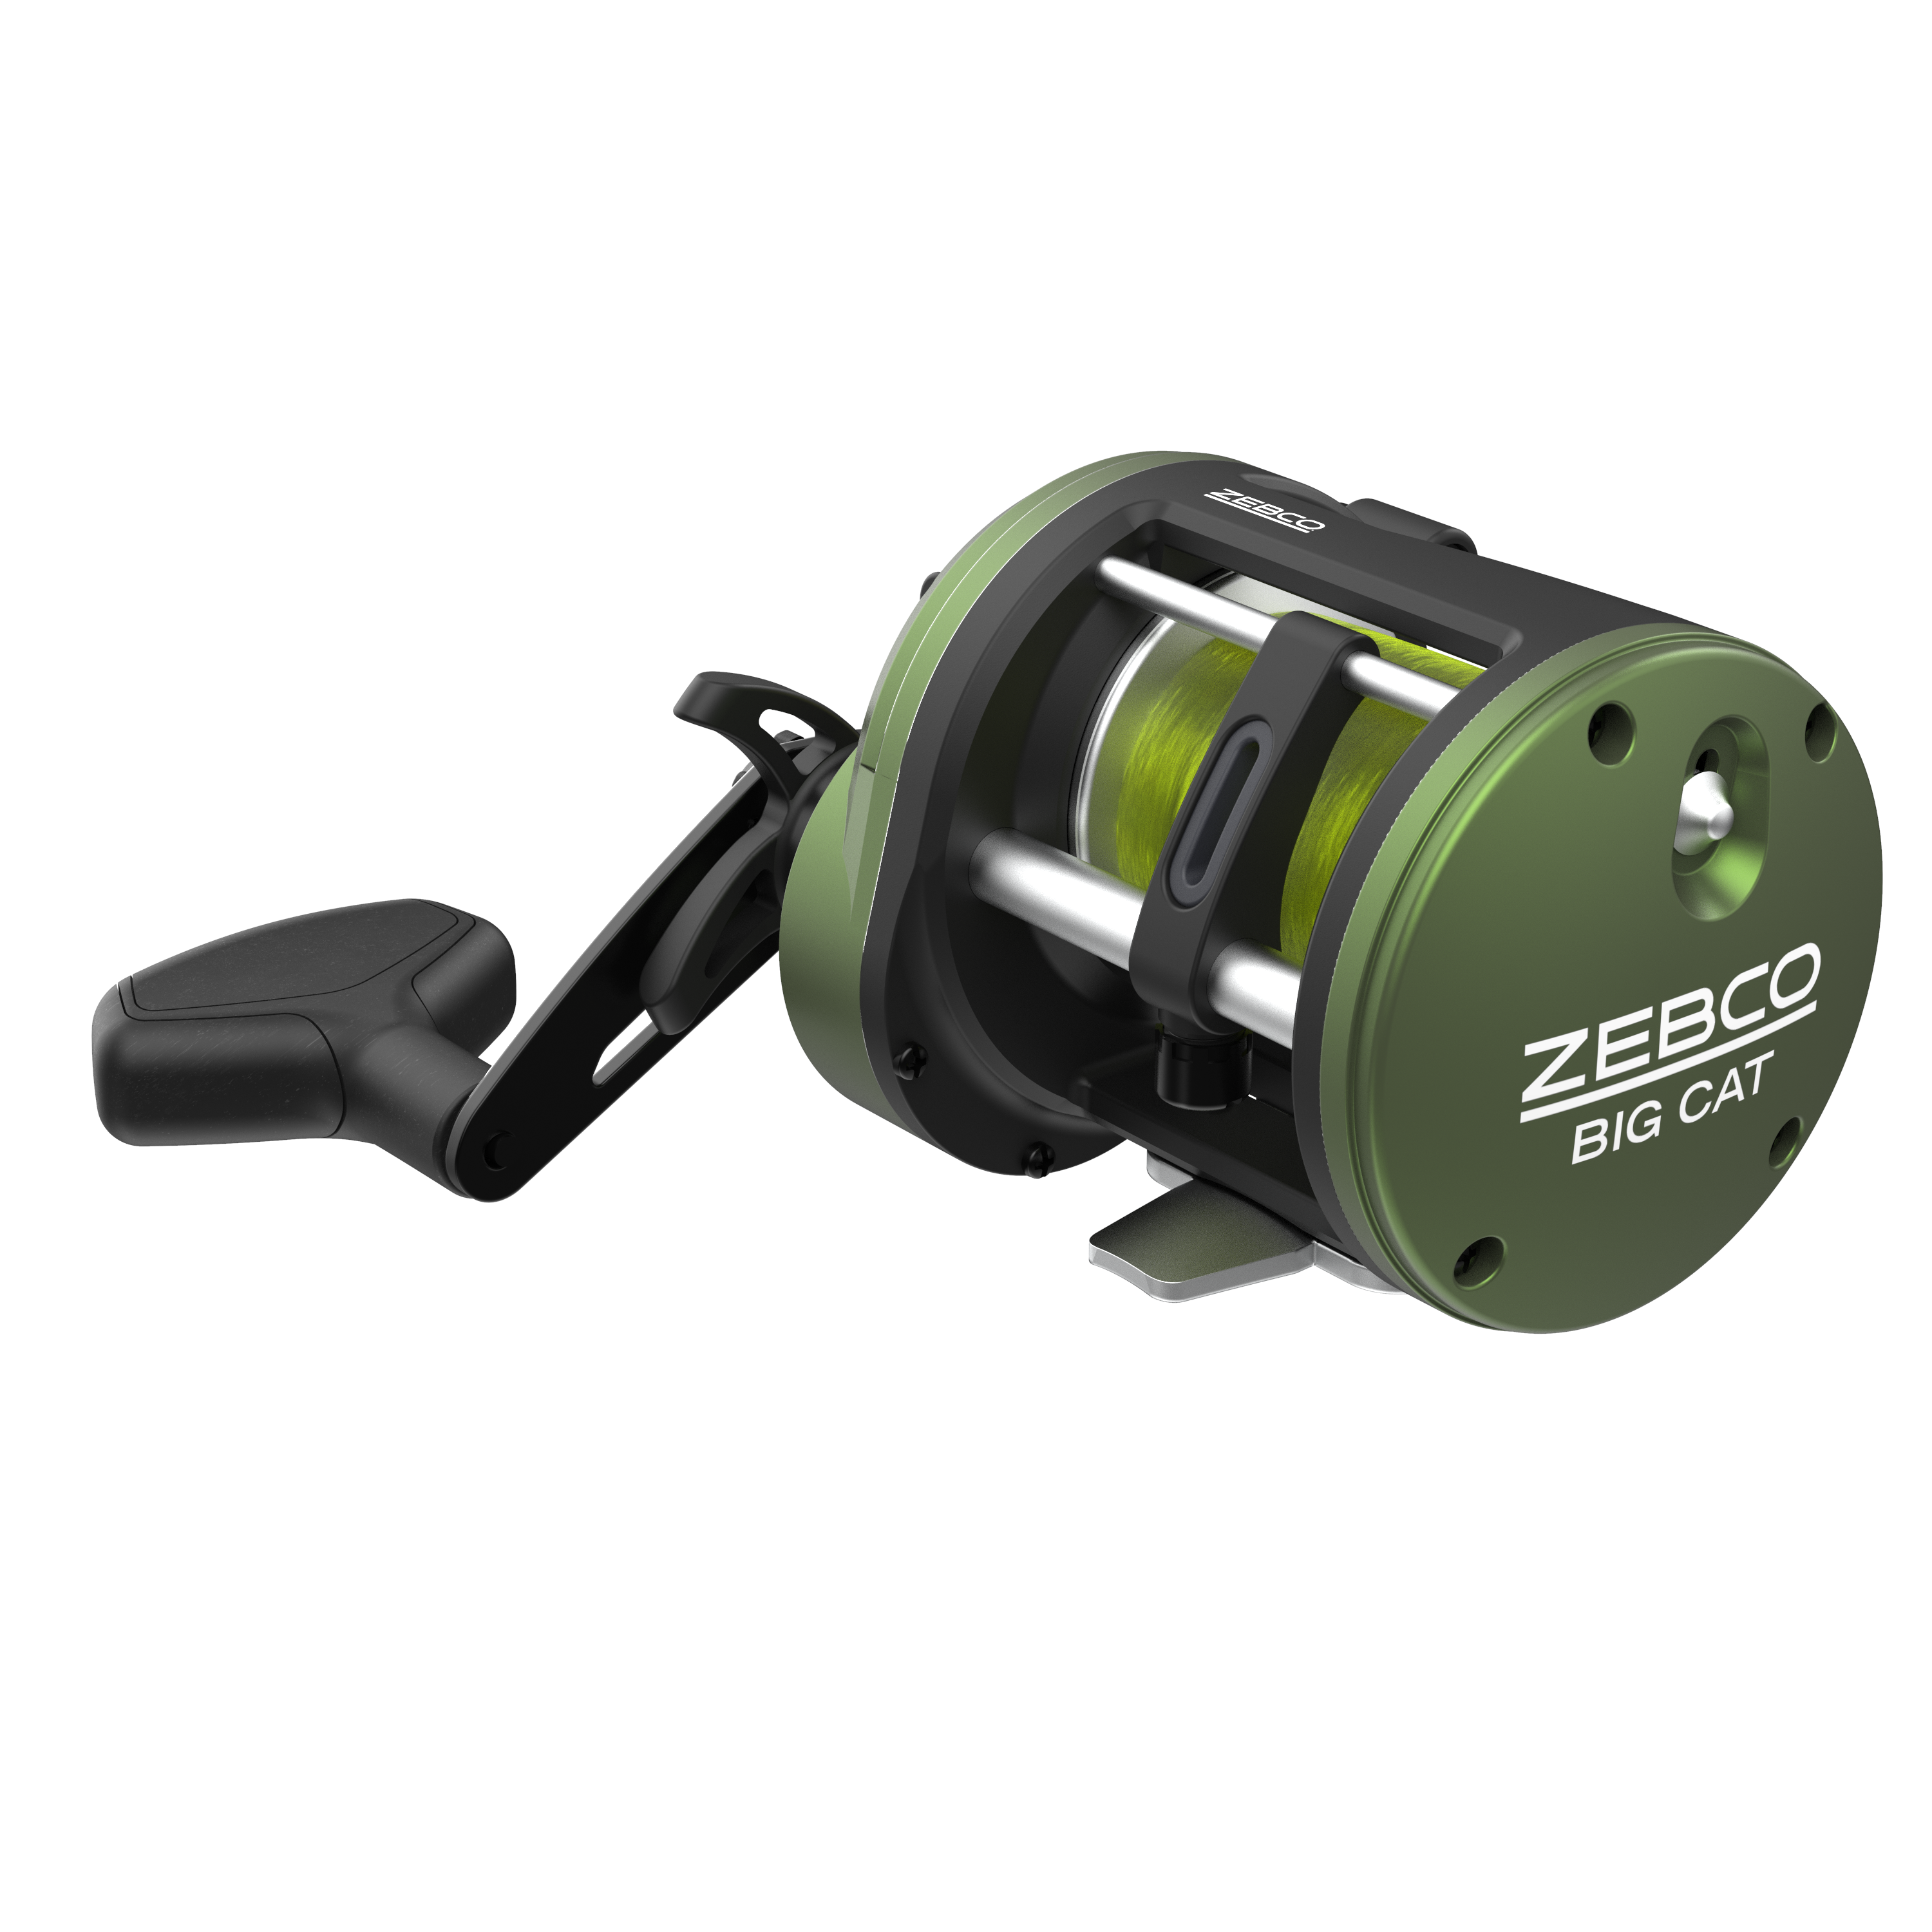 Conventional Reels, Durable and Heavy Duty Reels